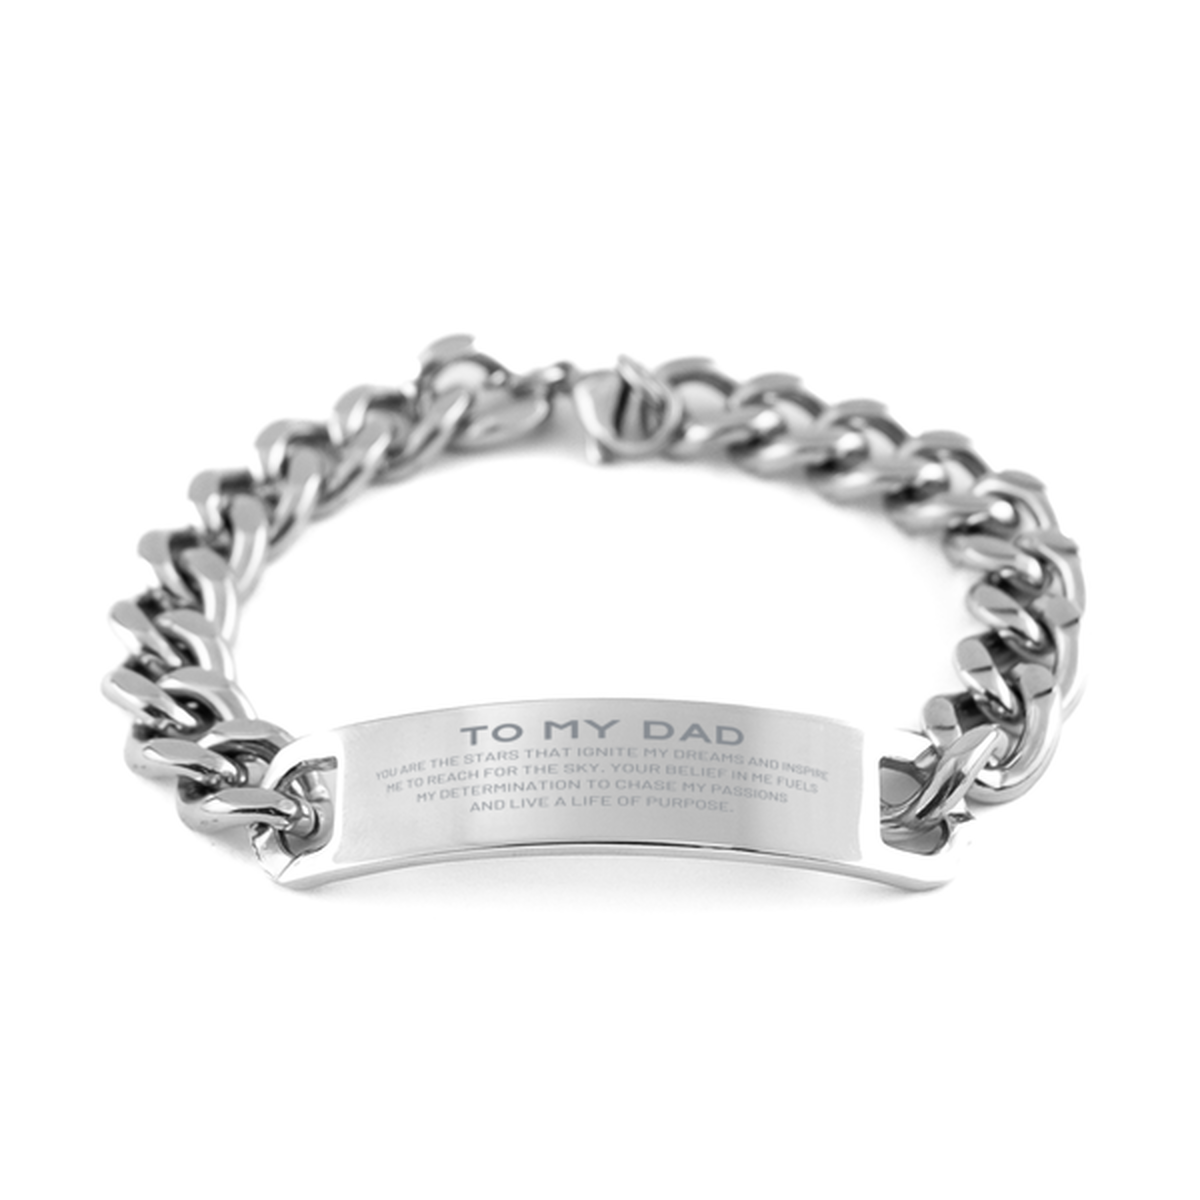 To My Dad Cuban Chain Stainless Steel Bracelet, You are the stars that ignite my dreams and inspire me to reach for the sky, Birthday Unique Gifts For Dad, Thank You Gifts For Dad